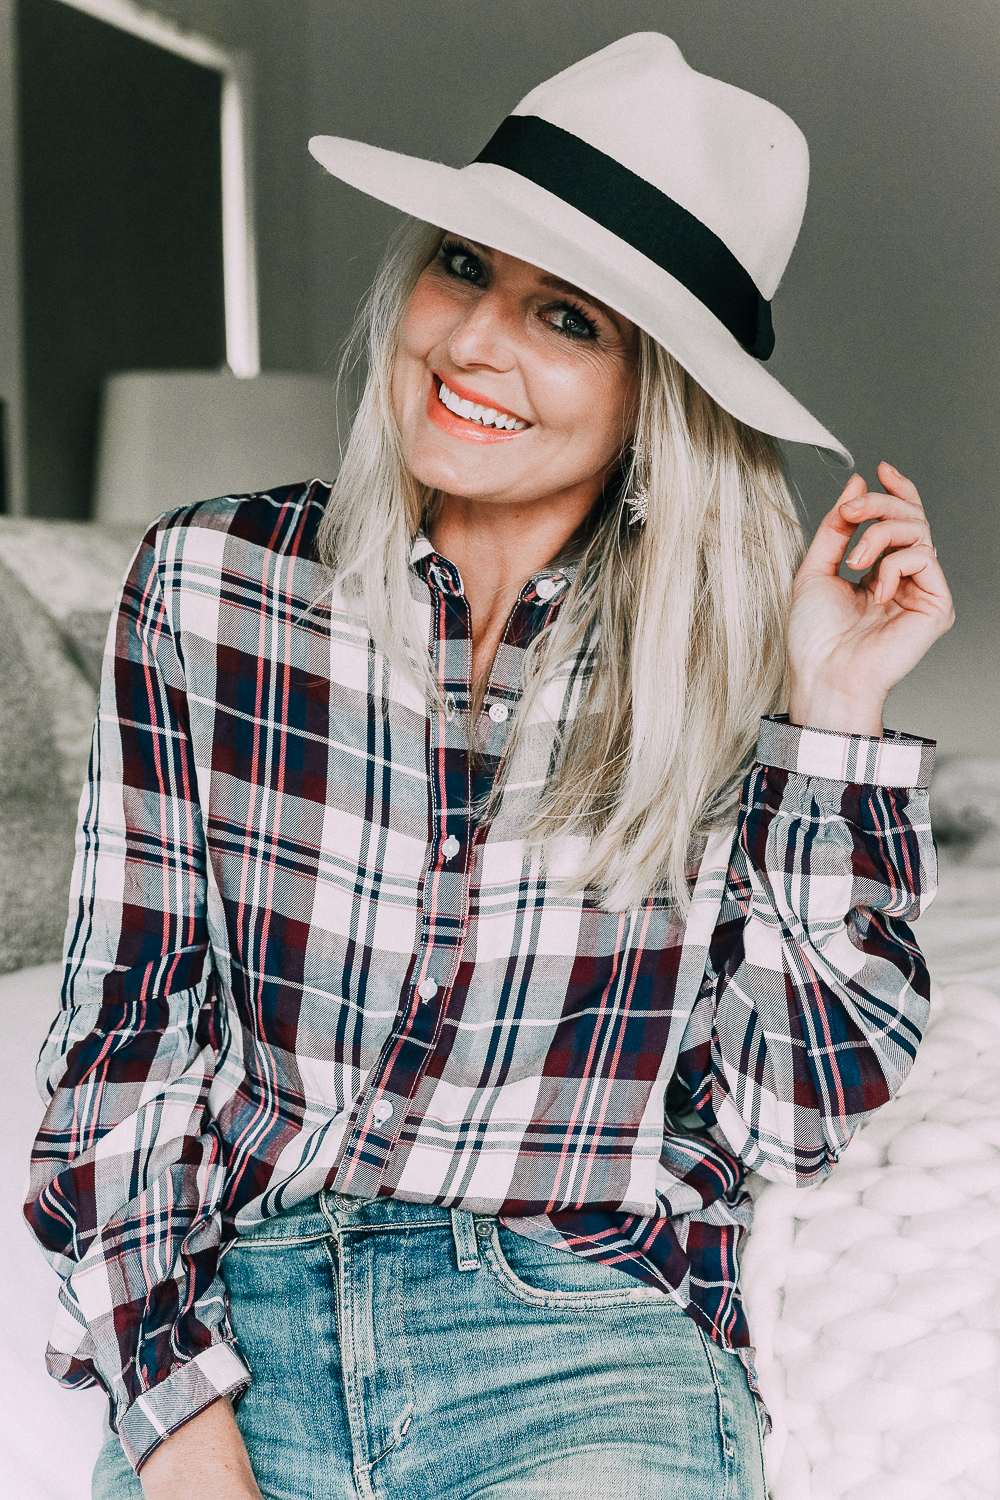 Blonde woman wearing a plaid shirt with bubble sleeves from Walmart with jeans sharing updating your fall wardrobe under $50